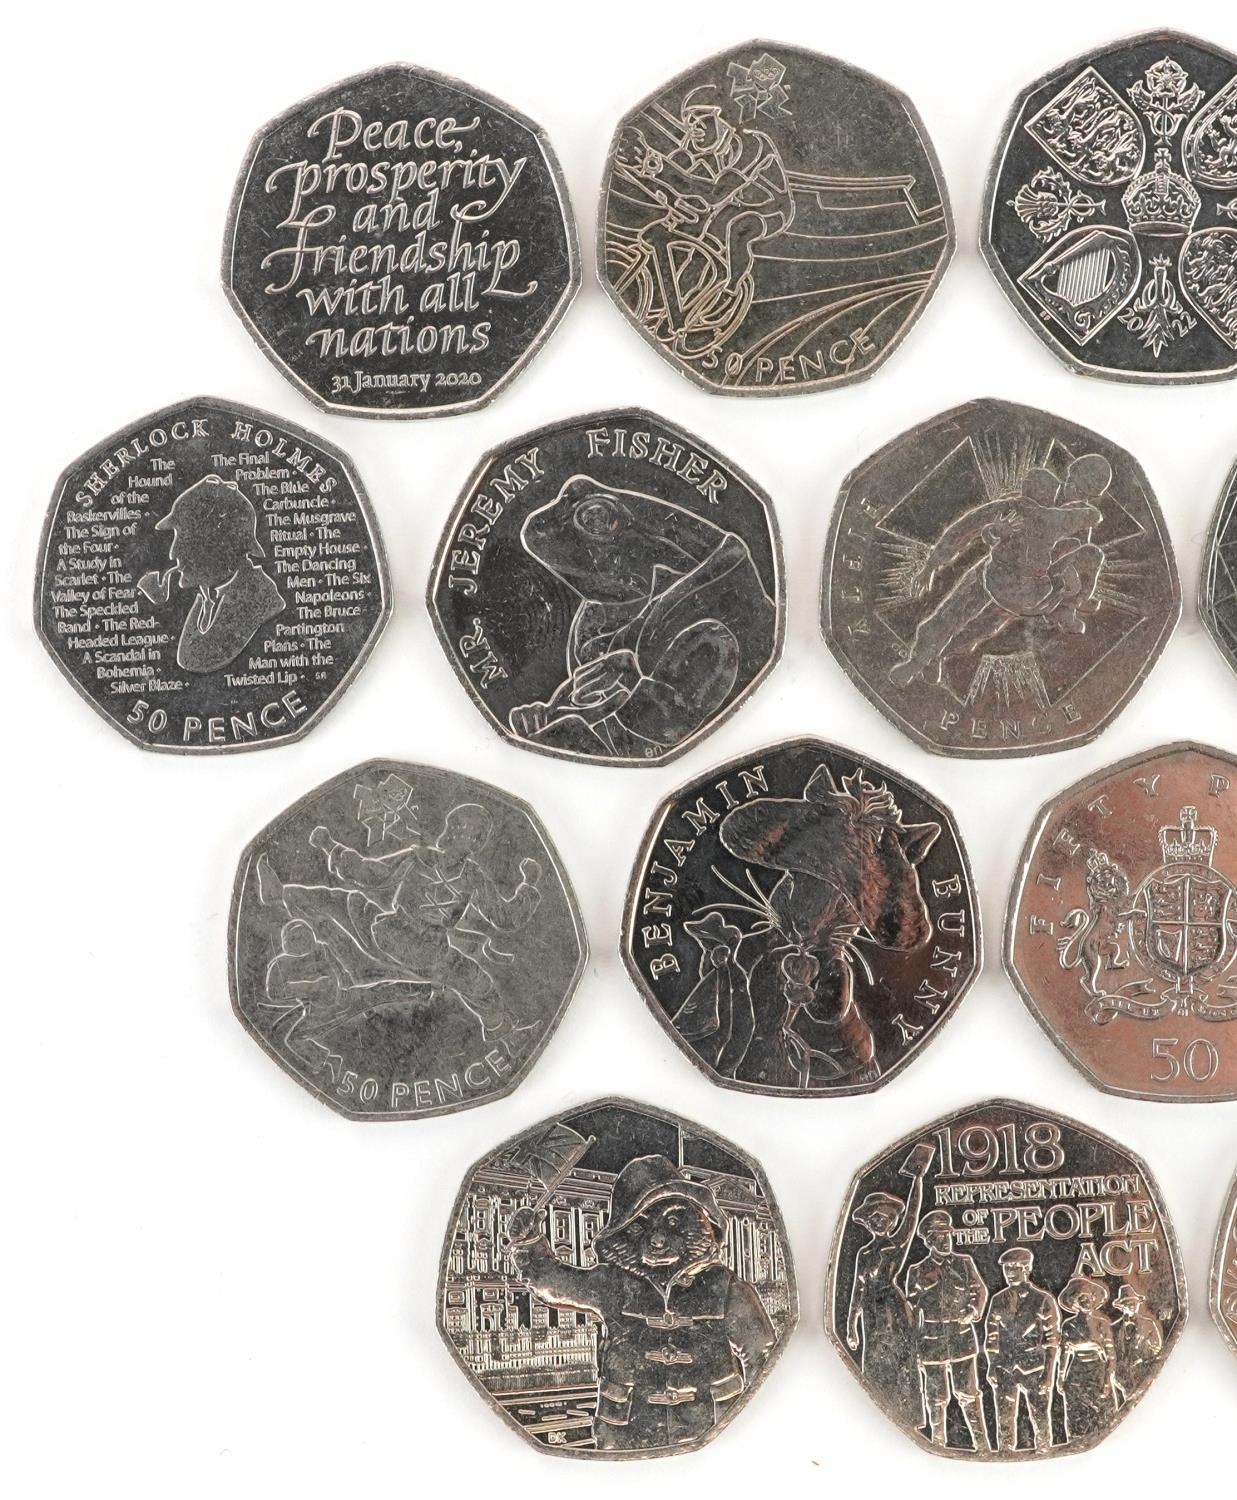 Twenty Elizabeth II fifty pence pieces, various designs including London 2012 Olympics and - Image 2 of 6